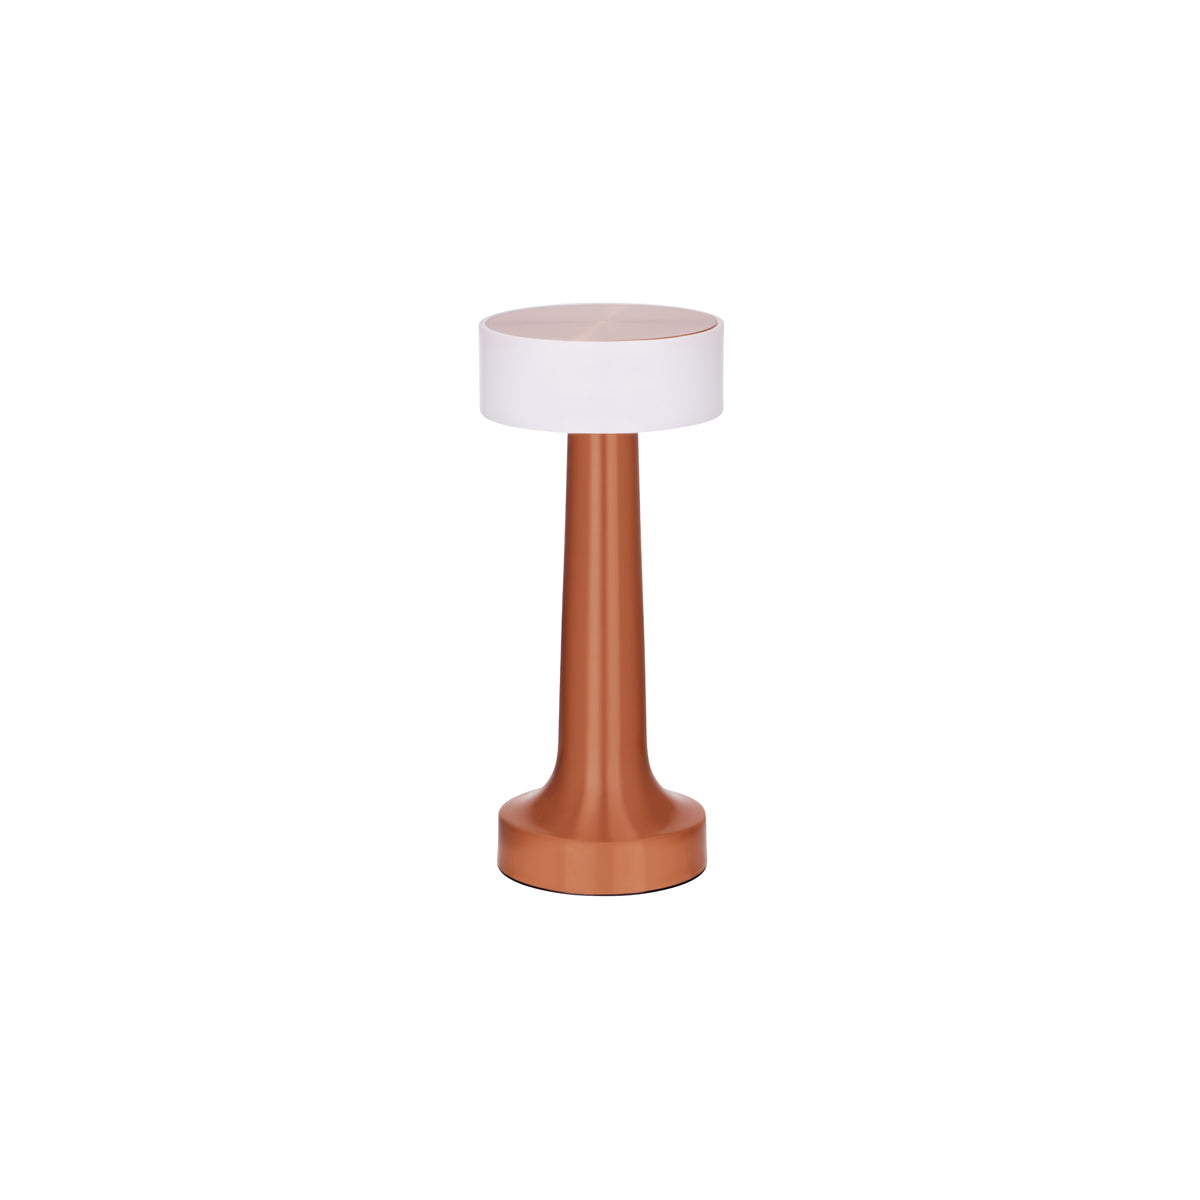 1000131 Tablekraft Ambience Aura Cordless LED Table Lamp Brushed Copper 90x205mm Tomkin Australia Hospitality Supplies